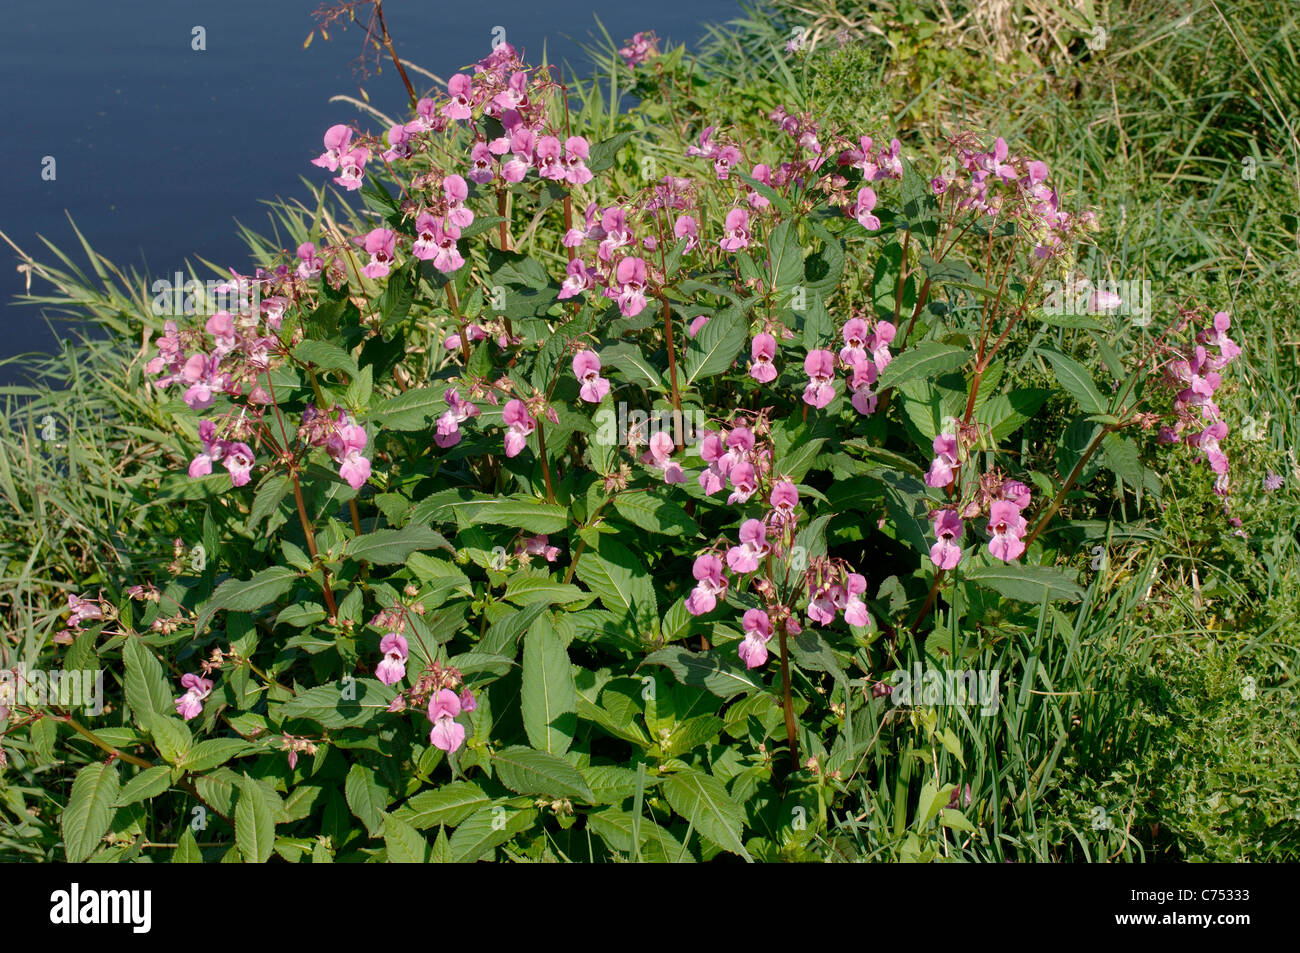 Himalayan balsam (Impatiens gladulifera) flowering on the bank of the River Axe Stock Photo